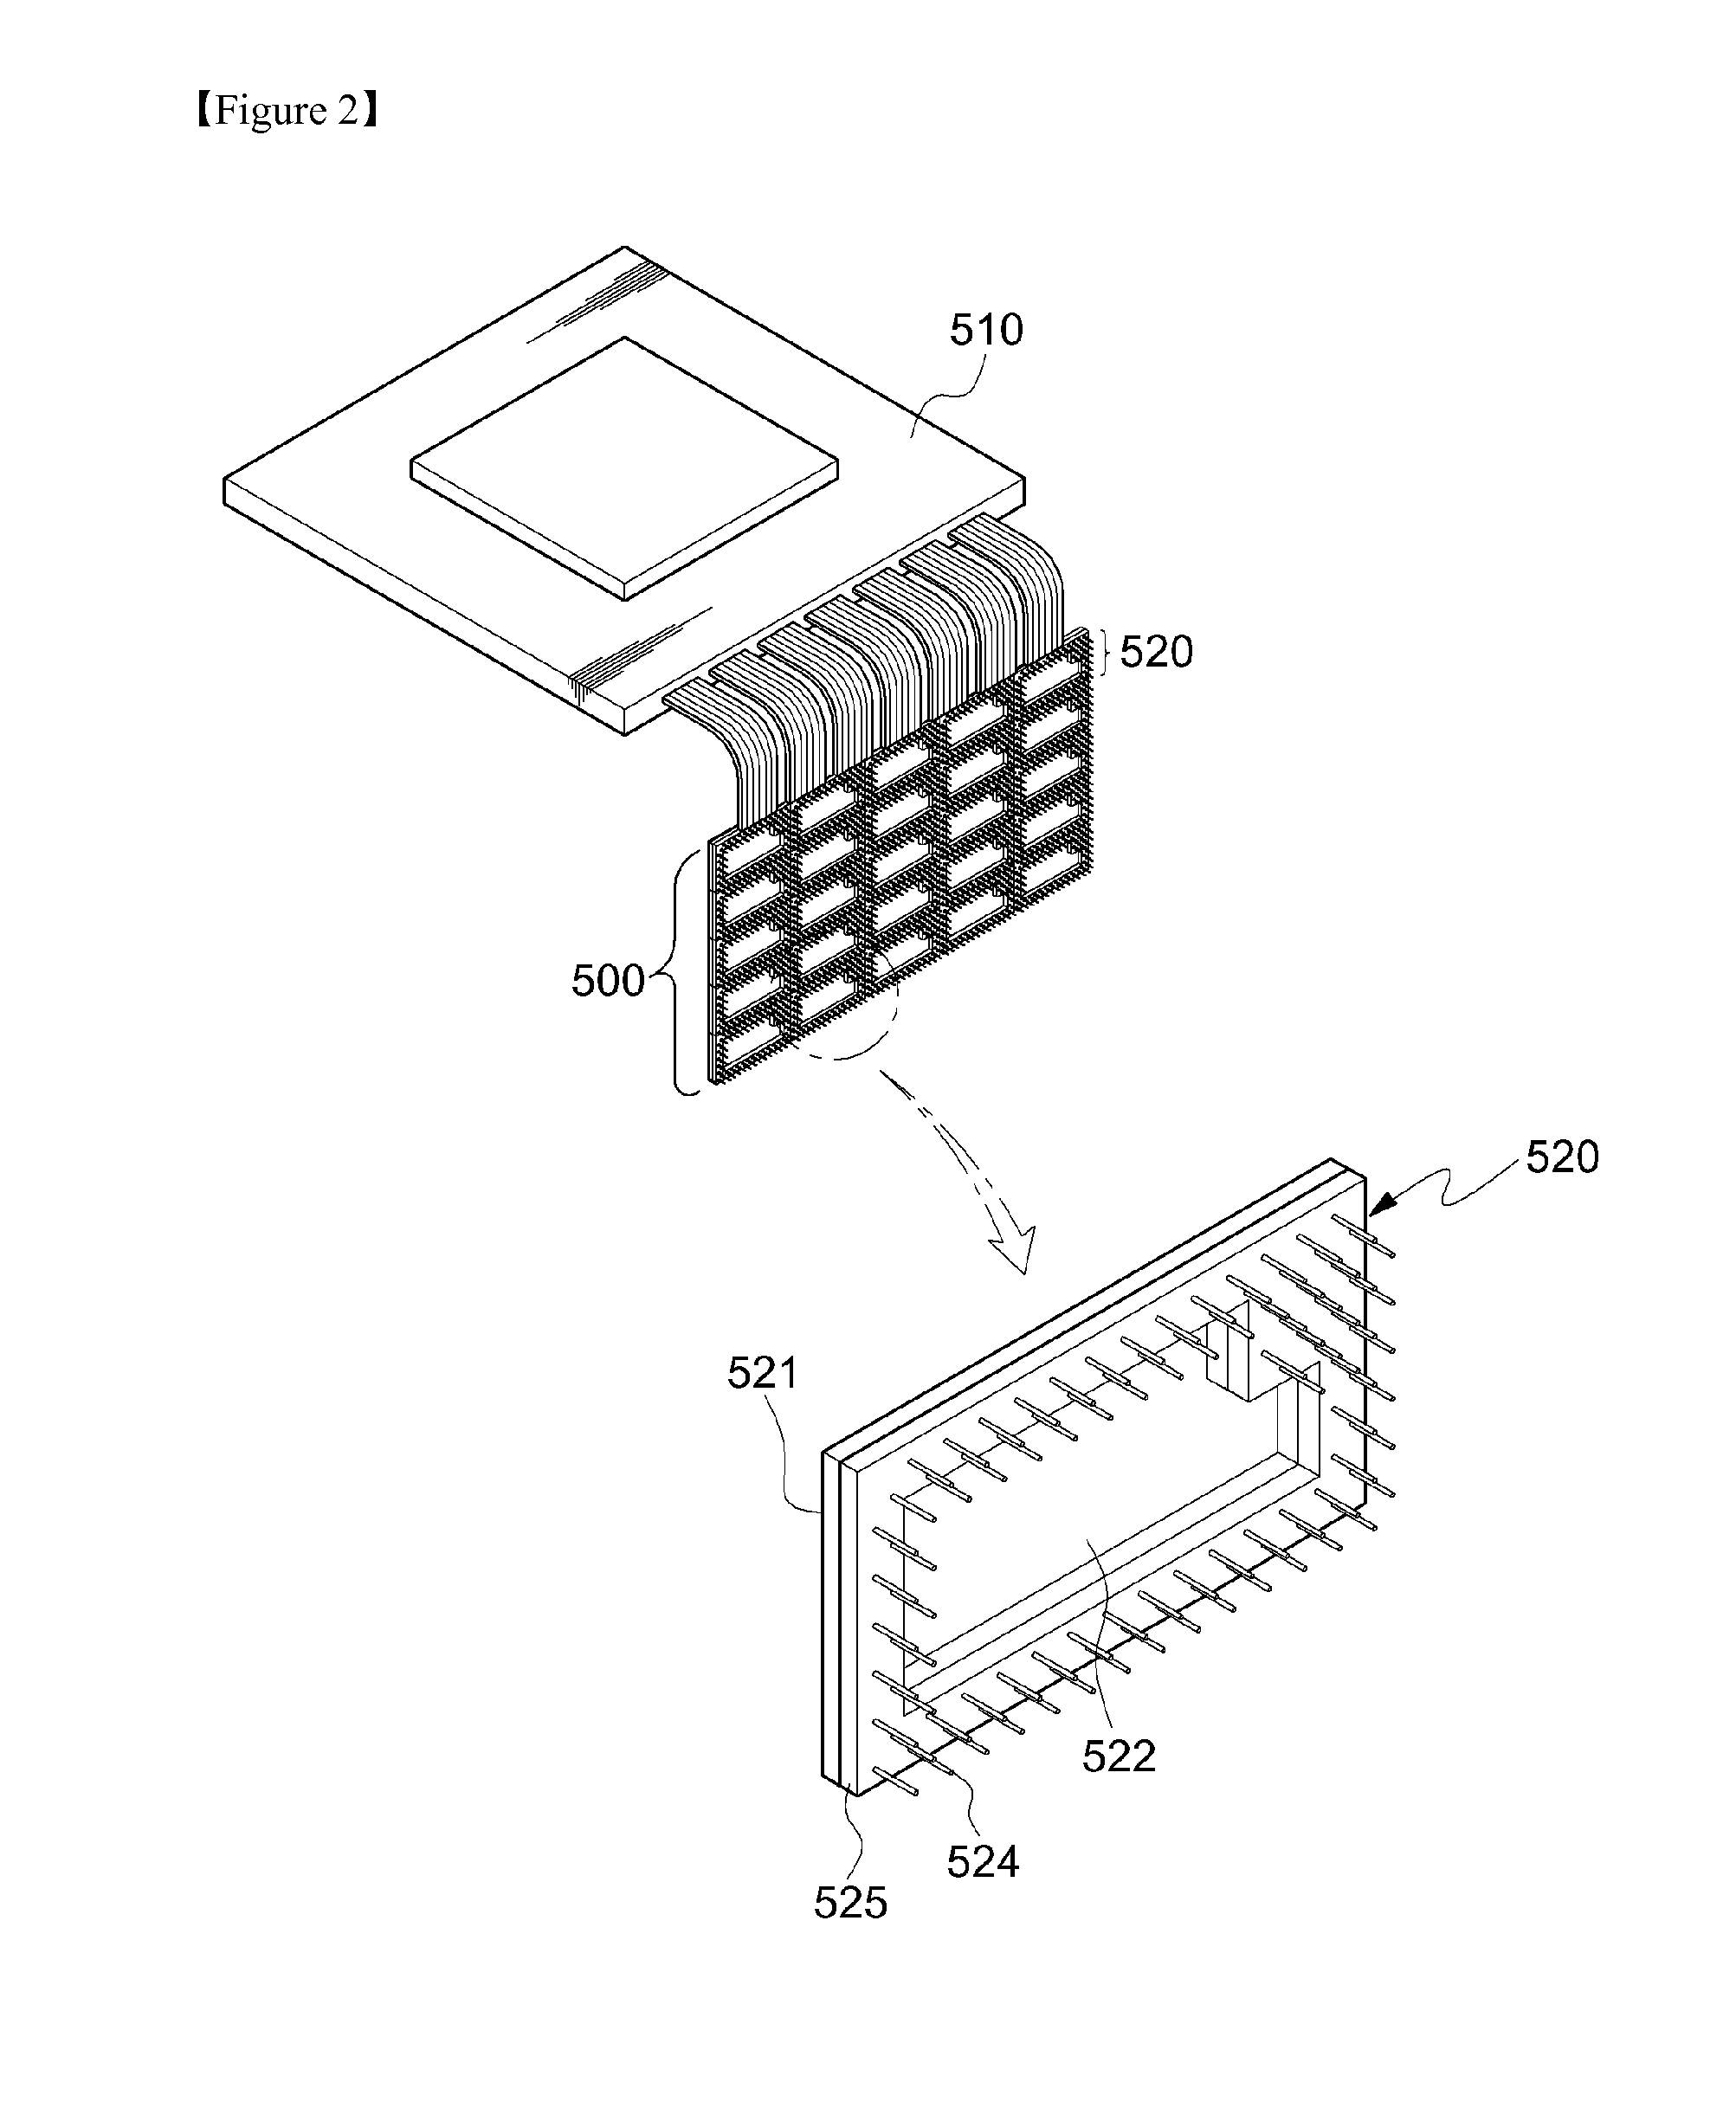 Neural Element Comprising Nanowires and Support Layer